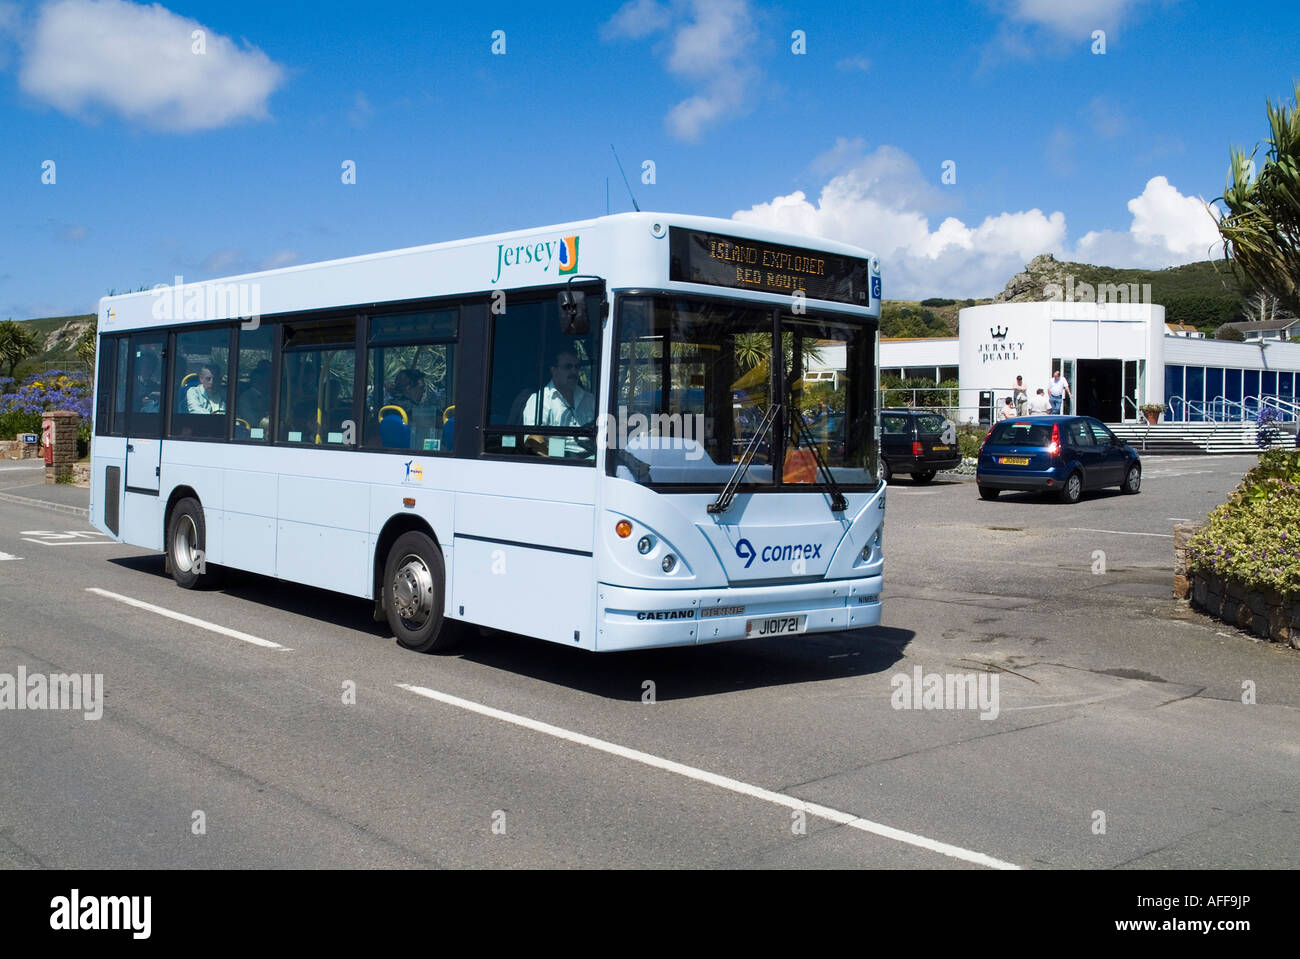 dh St Ouen Bay ST OUEN JERSEY Channel Island Explorer Red Route Connex bus  at Jersey Pearl bus stop mybus service public transport islands Stock Photo  - Alamy